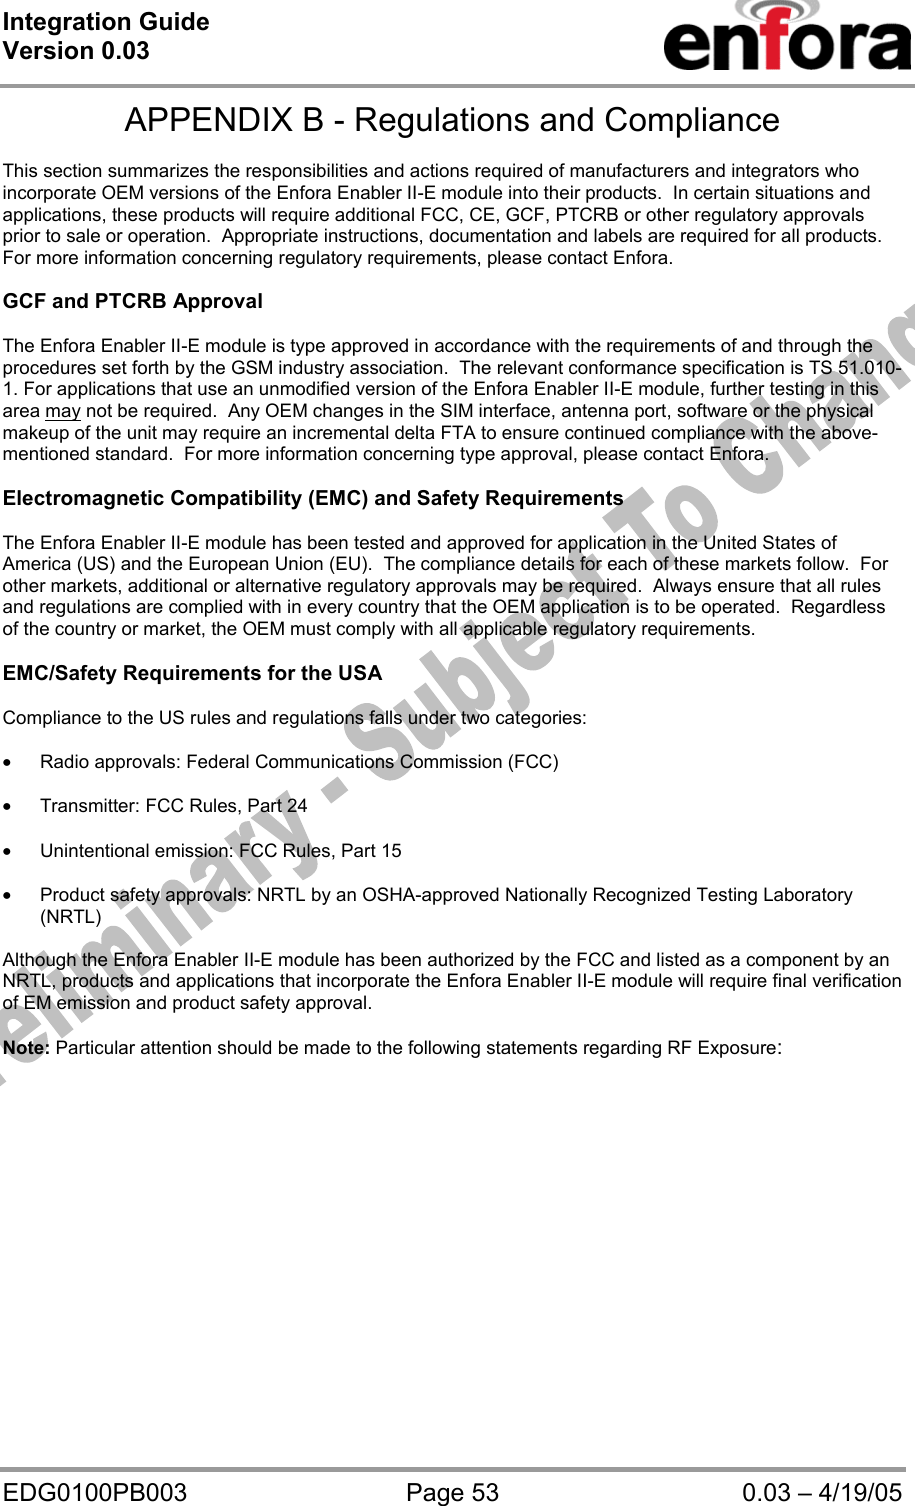 Integration Guide  Version 0.03   EDG0100PB003  Page 53  0.03 – 4/19/05 APPENDIX B - Regulations and Compliance  This section summarizes the responsibilities and actions required of manufacturers and integrators who incorporate OEM versions of the Enfora Enabler II-E module into their products.  In certain situations and applications, these products will require additional FCC, CE, GCF, PTCRB or other regulatory approvals prior to sale or operation.  Appropriate instructions, documentation and labels are required for all products.  For more information concerning regulatory requirements, please contact Enfora.  GCF and PTCRB Approval   The Enfora Enabler II-E module is type approved in accordance with the requirements of and through the procedures set forth by the GSM industry association.  The relevant conformance specification is TS 51.010-1. For applications that use an unmodified version of the Enfora Enabler II-E module, further testing in this area may not be required.  Any OEM changes in the SIM interface, antenna port, software or the physical makeup of the unit may require an incremental delta FTA to ensure continued compliance with the above-mentioned standard.  For more information concerning type approval, please contact Enfora.  Electromagnetic Compatibility (EMC) and Safety Requirements  The Enfora Enabler II-E module has been tested and approved for application in the United States of America (US) and the European Union (EU).  The compliance details for each of these markets follow.  For other markets, additional or alternative regulatory approvals may be required.  Always ensure that all rules and regulations are complied with in every country that the OEM application is to be operated.  Regardless of the country or market, the OEM must comply with all applicable regulatory requirements.  EMC/Safety Requirements for the USA  Compliance to the US rules and regulations falls under two categories:  • Radio approvals: Federal Communications Commission (FCC)  • Transmitter: FCC Rules, Part 24  • Unintentional emission: FCC Rules, Part 15  • Product safety approvals: NRTL by an OSHA-approved Nationally Recognized Testing Laboratory (NRTL)  Although the Enfora Enabler II-E module has been authorized by the FCC and listed as a component by an NRTL, products and applications that incorporate the Enfora Enabler II-E module will require final verification of EM emission and product safety approval.  Note: Particular attention should be made to the following statements regarding RF Exposure: 